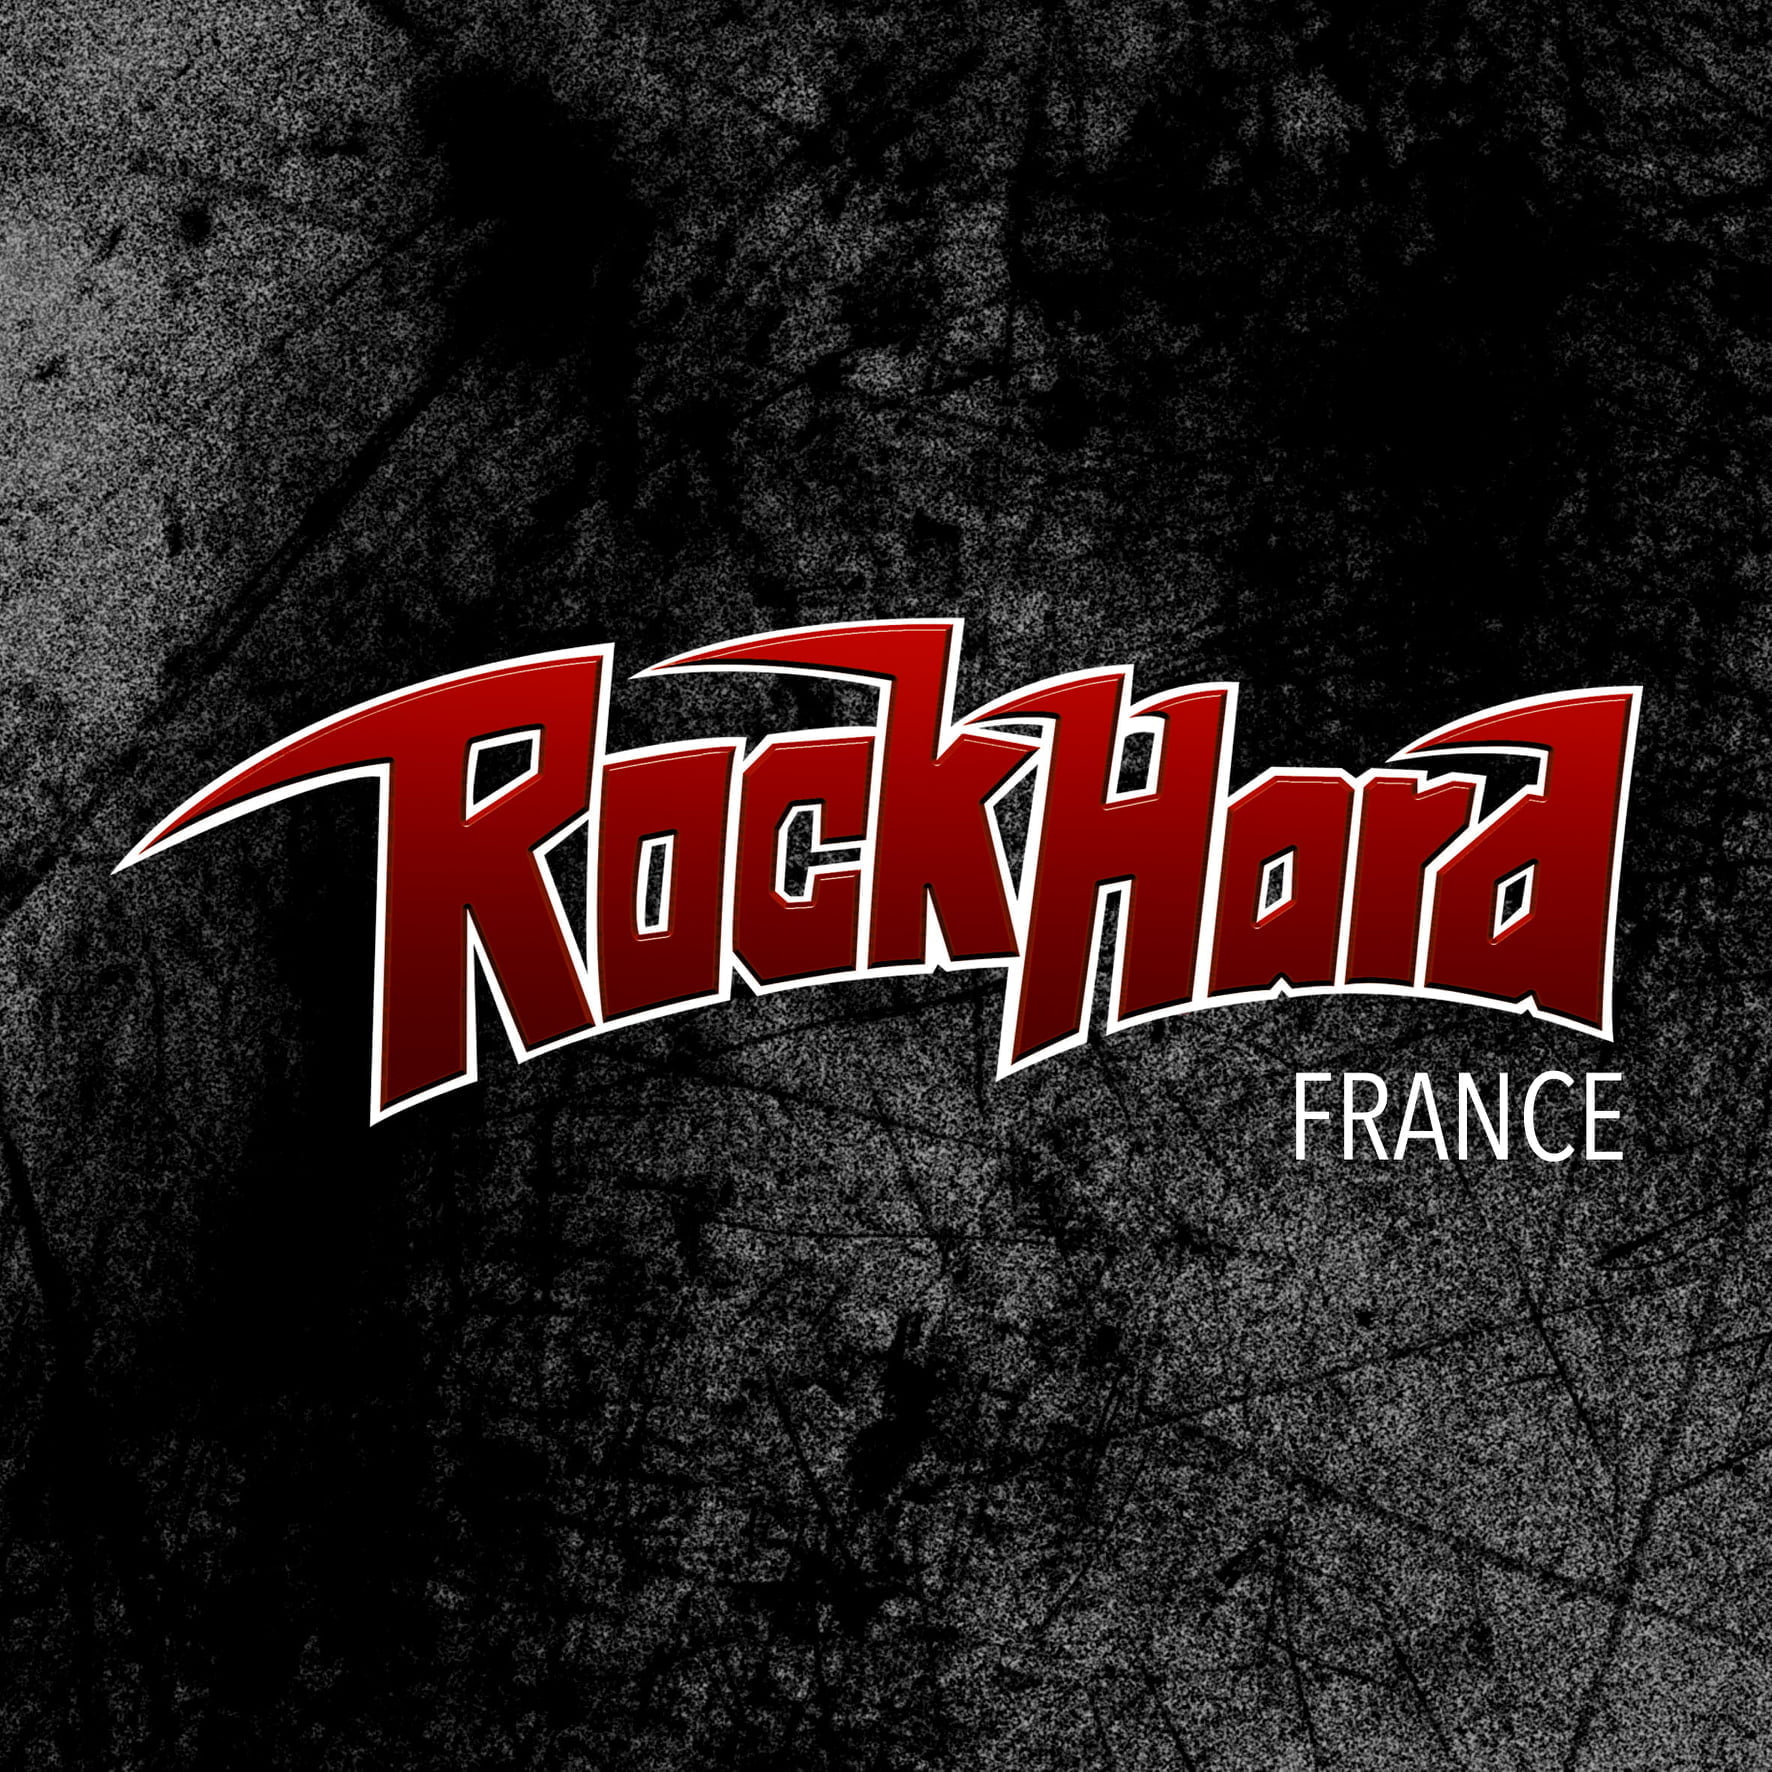 You are currently viewing ROCK HARD de Fevrier (#217)